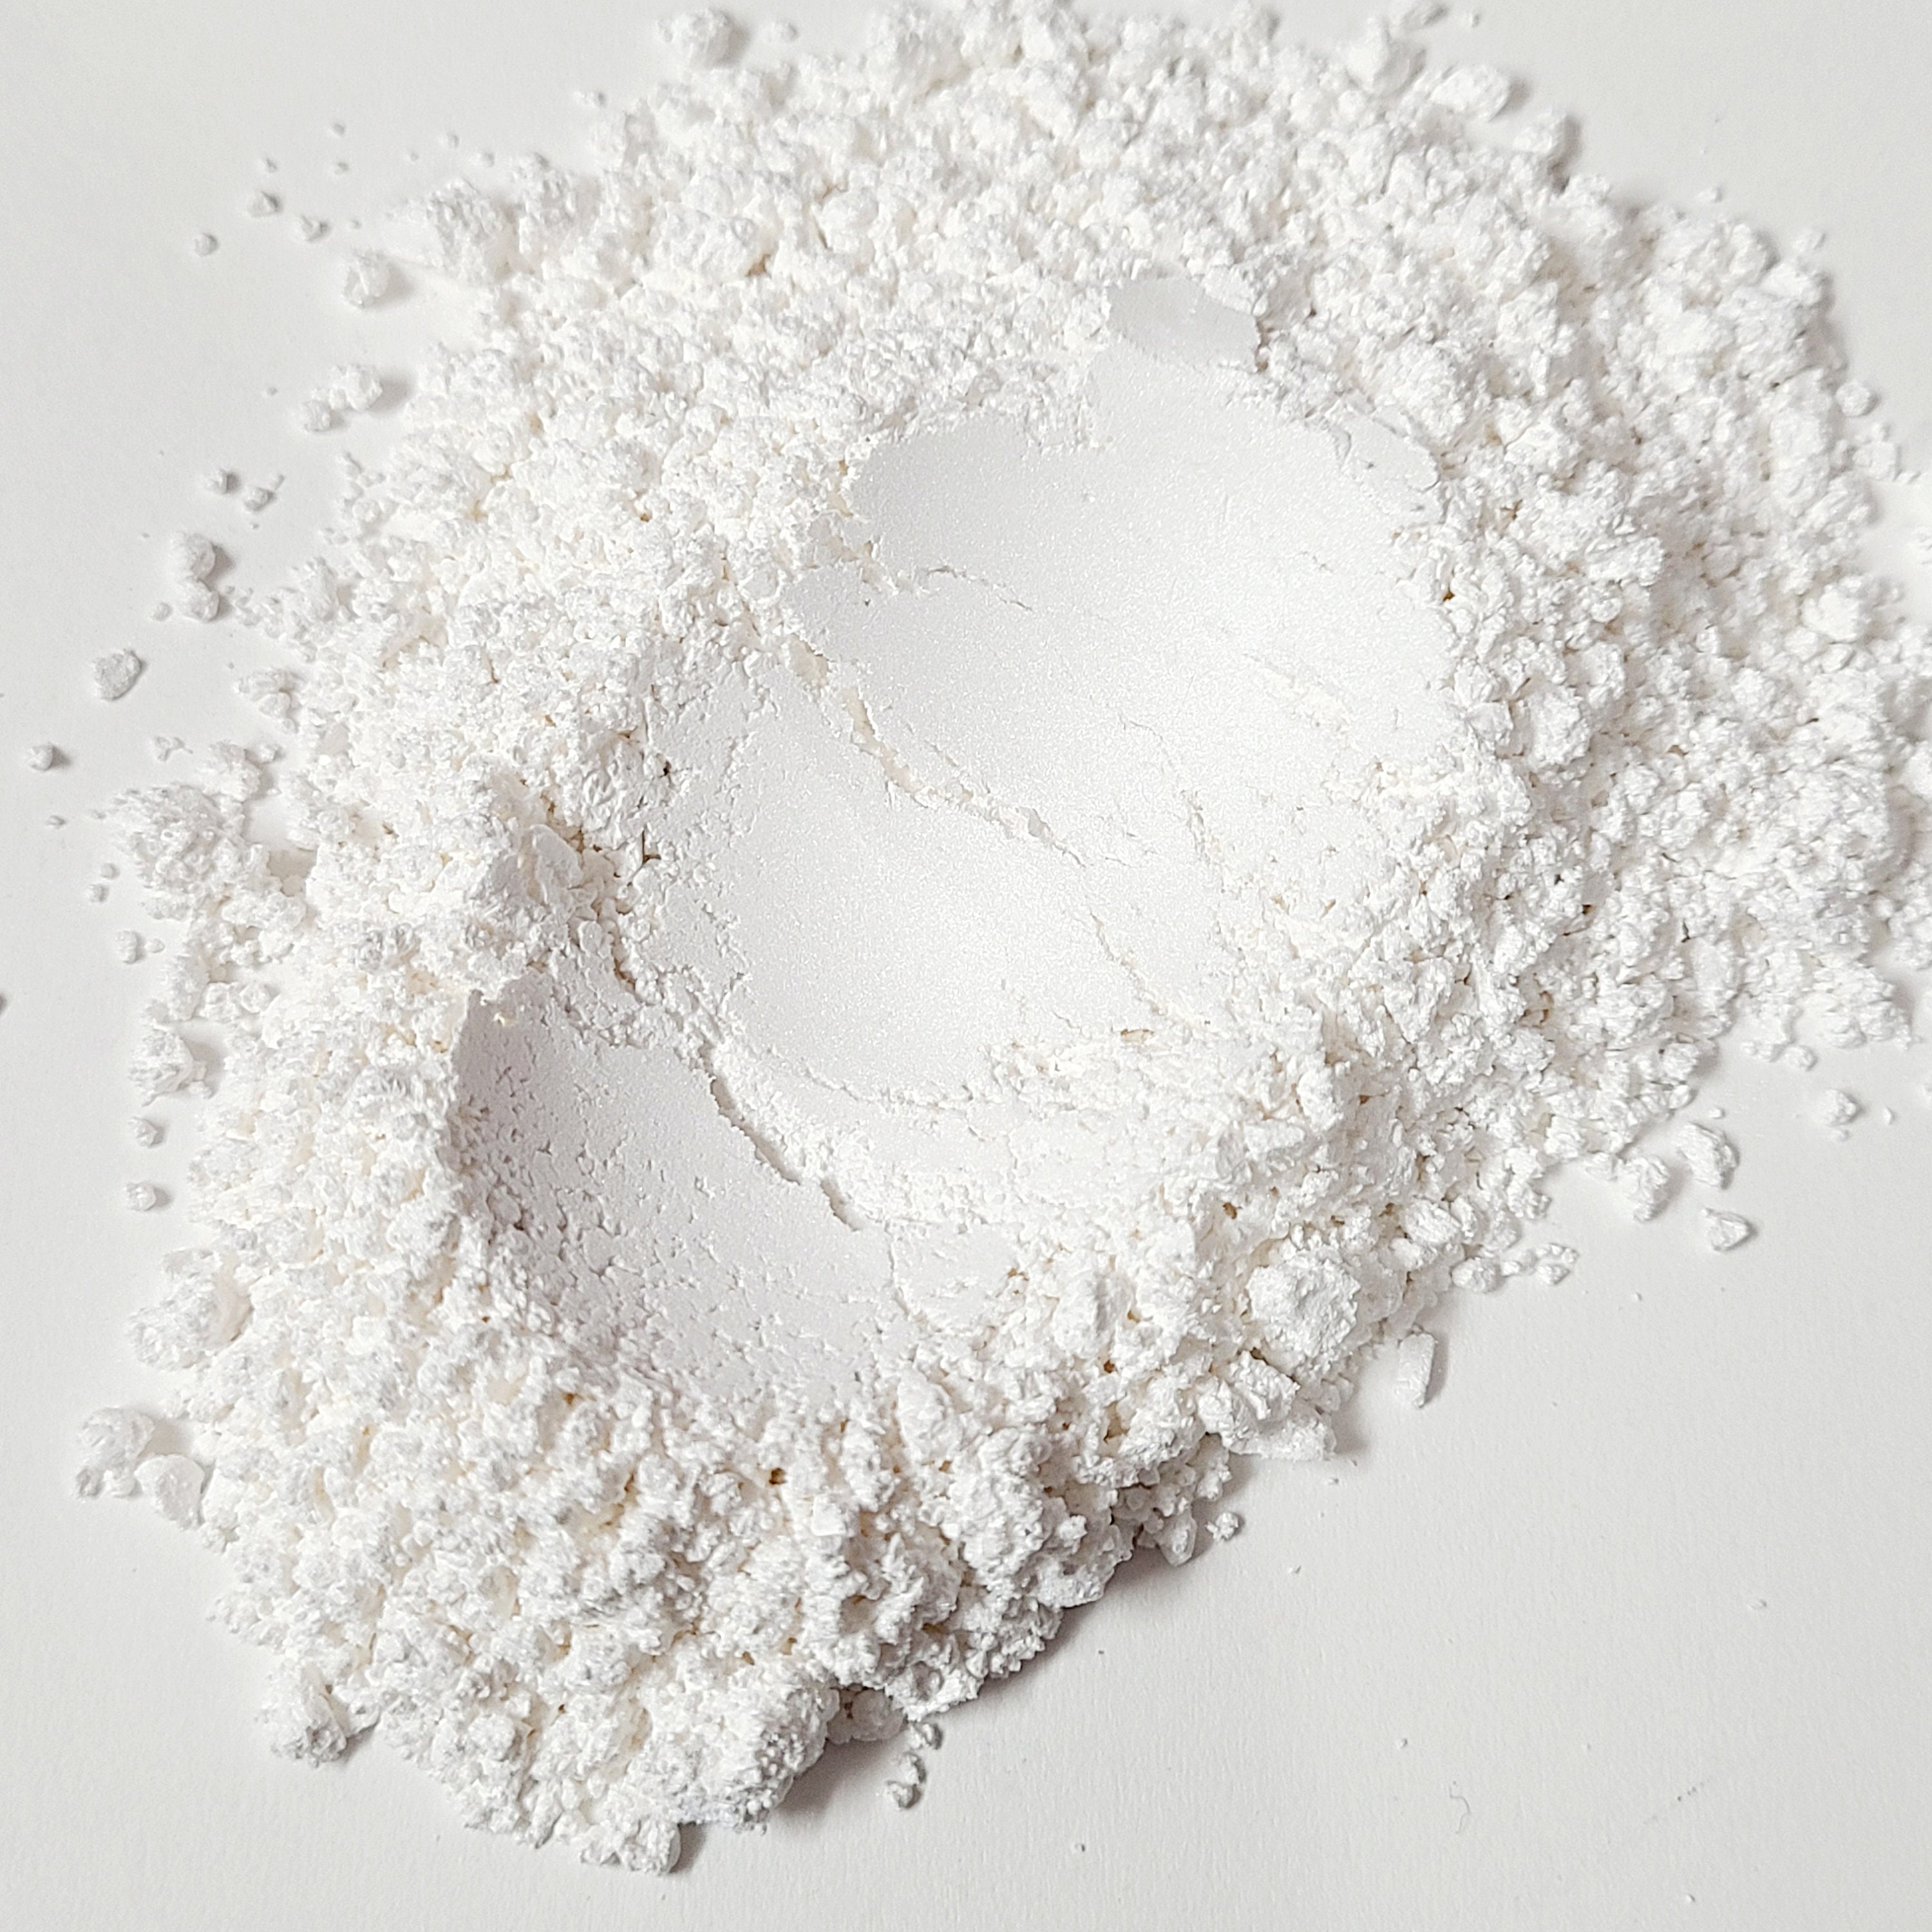 Pearl White Cosmetic Grade Pearlescent Mica Powder for Nail Art